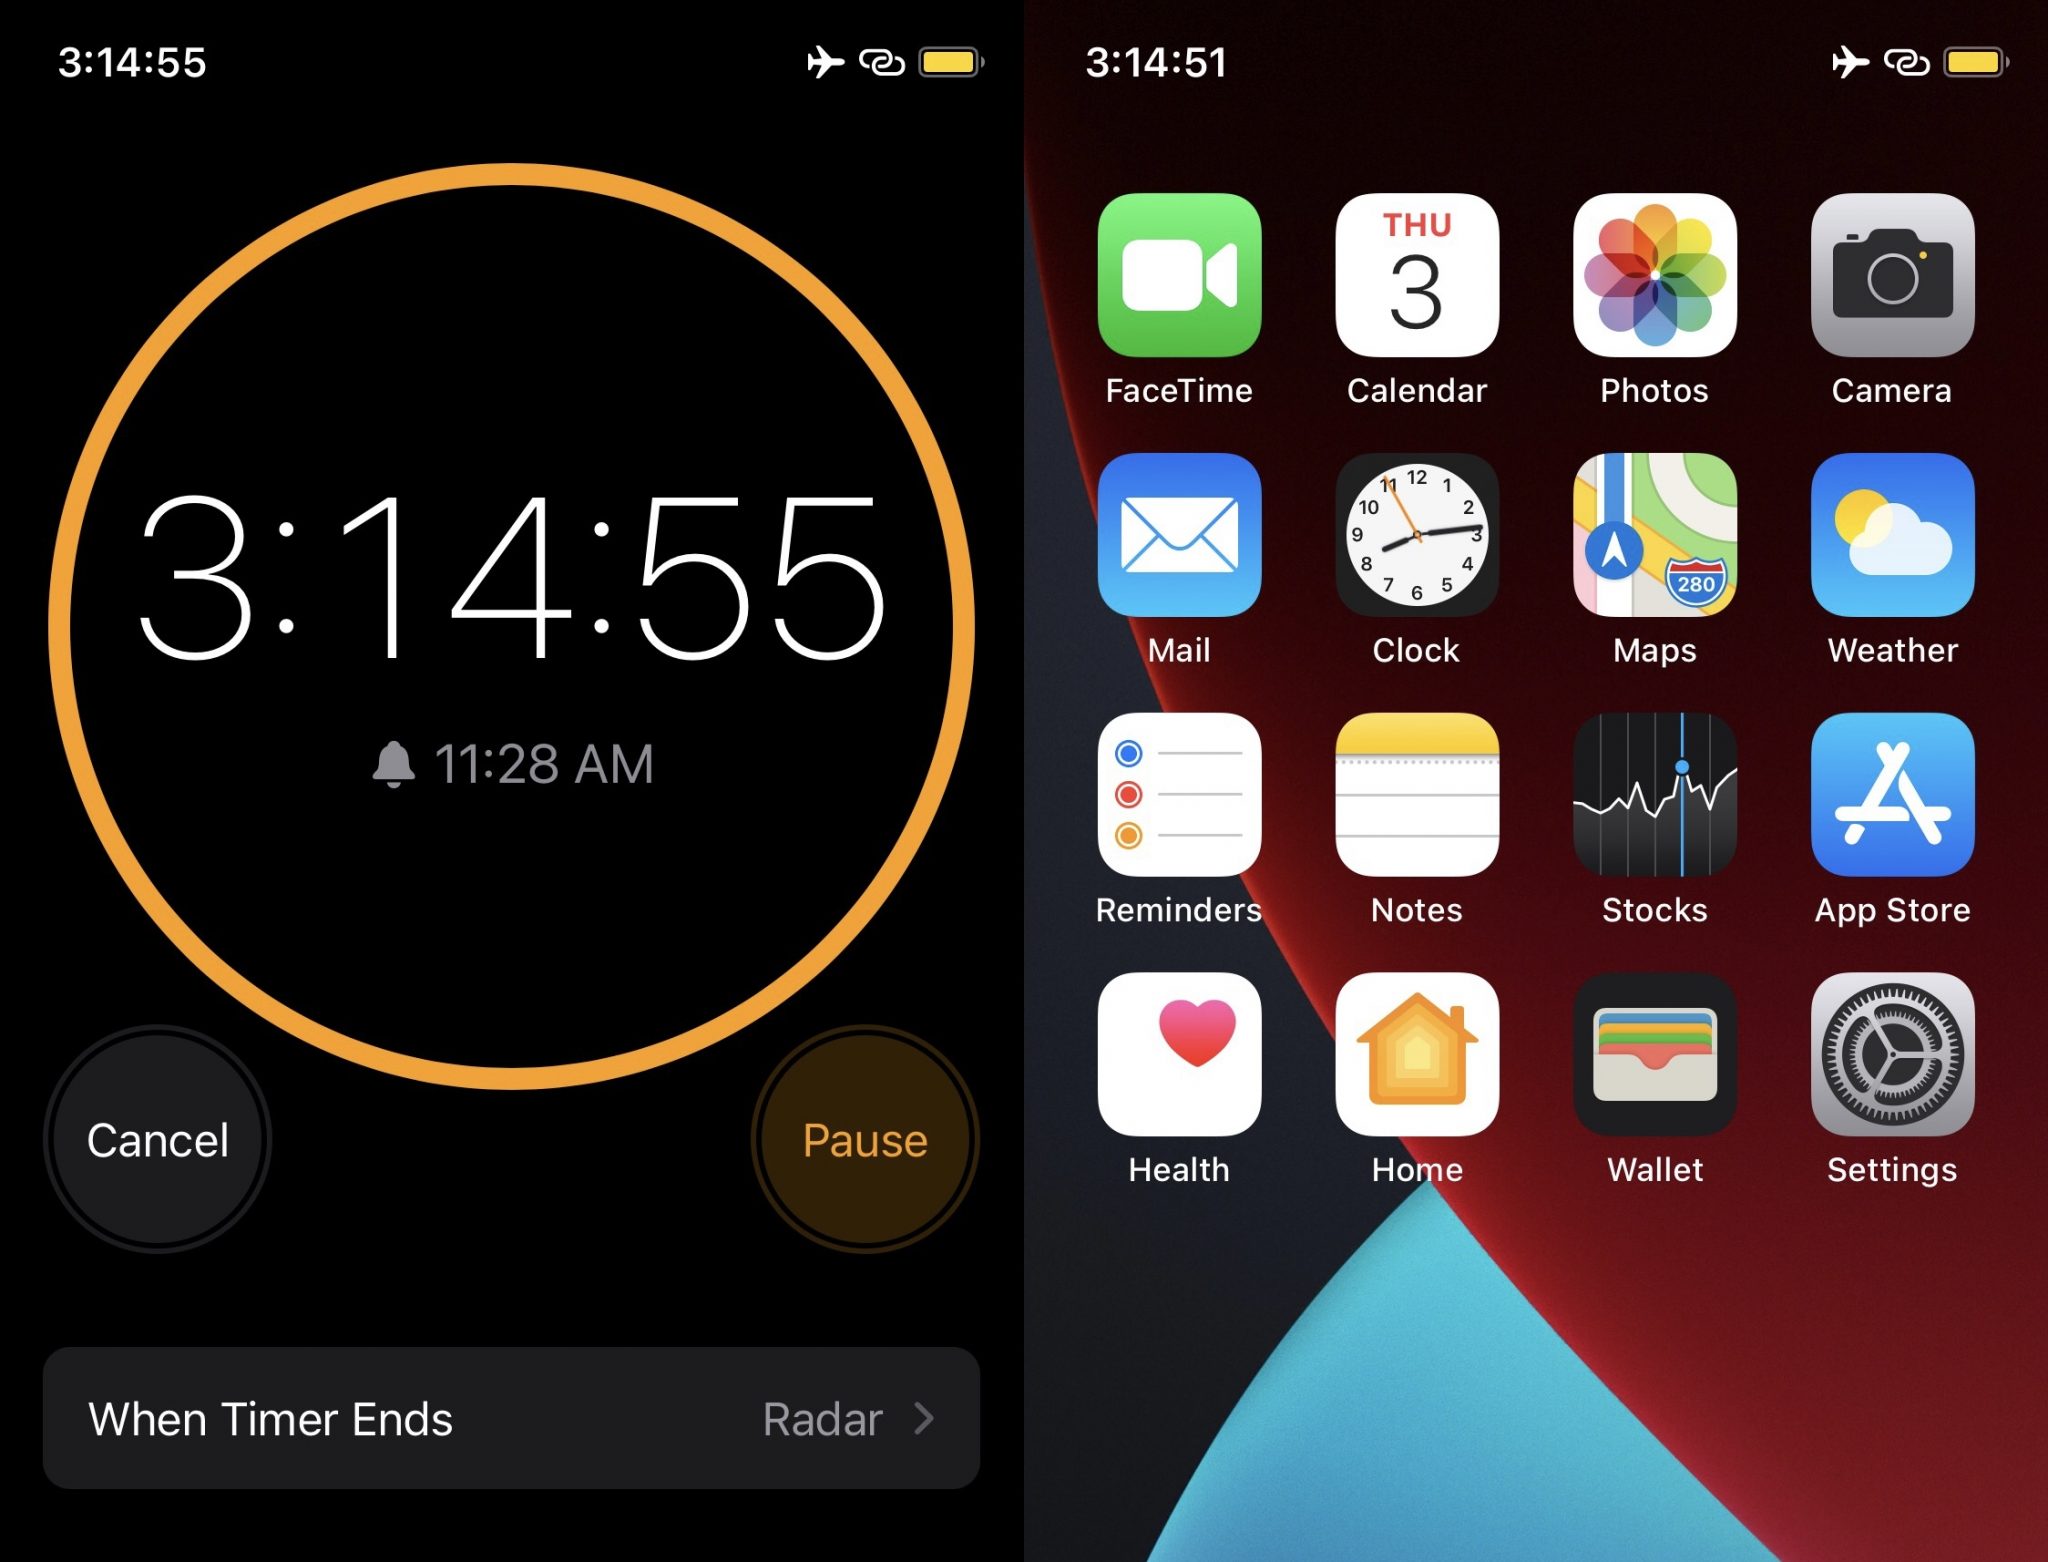 StatusBarTimer adds a countdown timer to the Status Bar for any active timers.